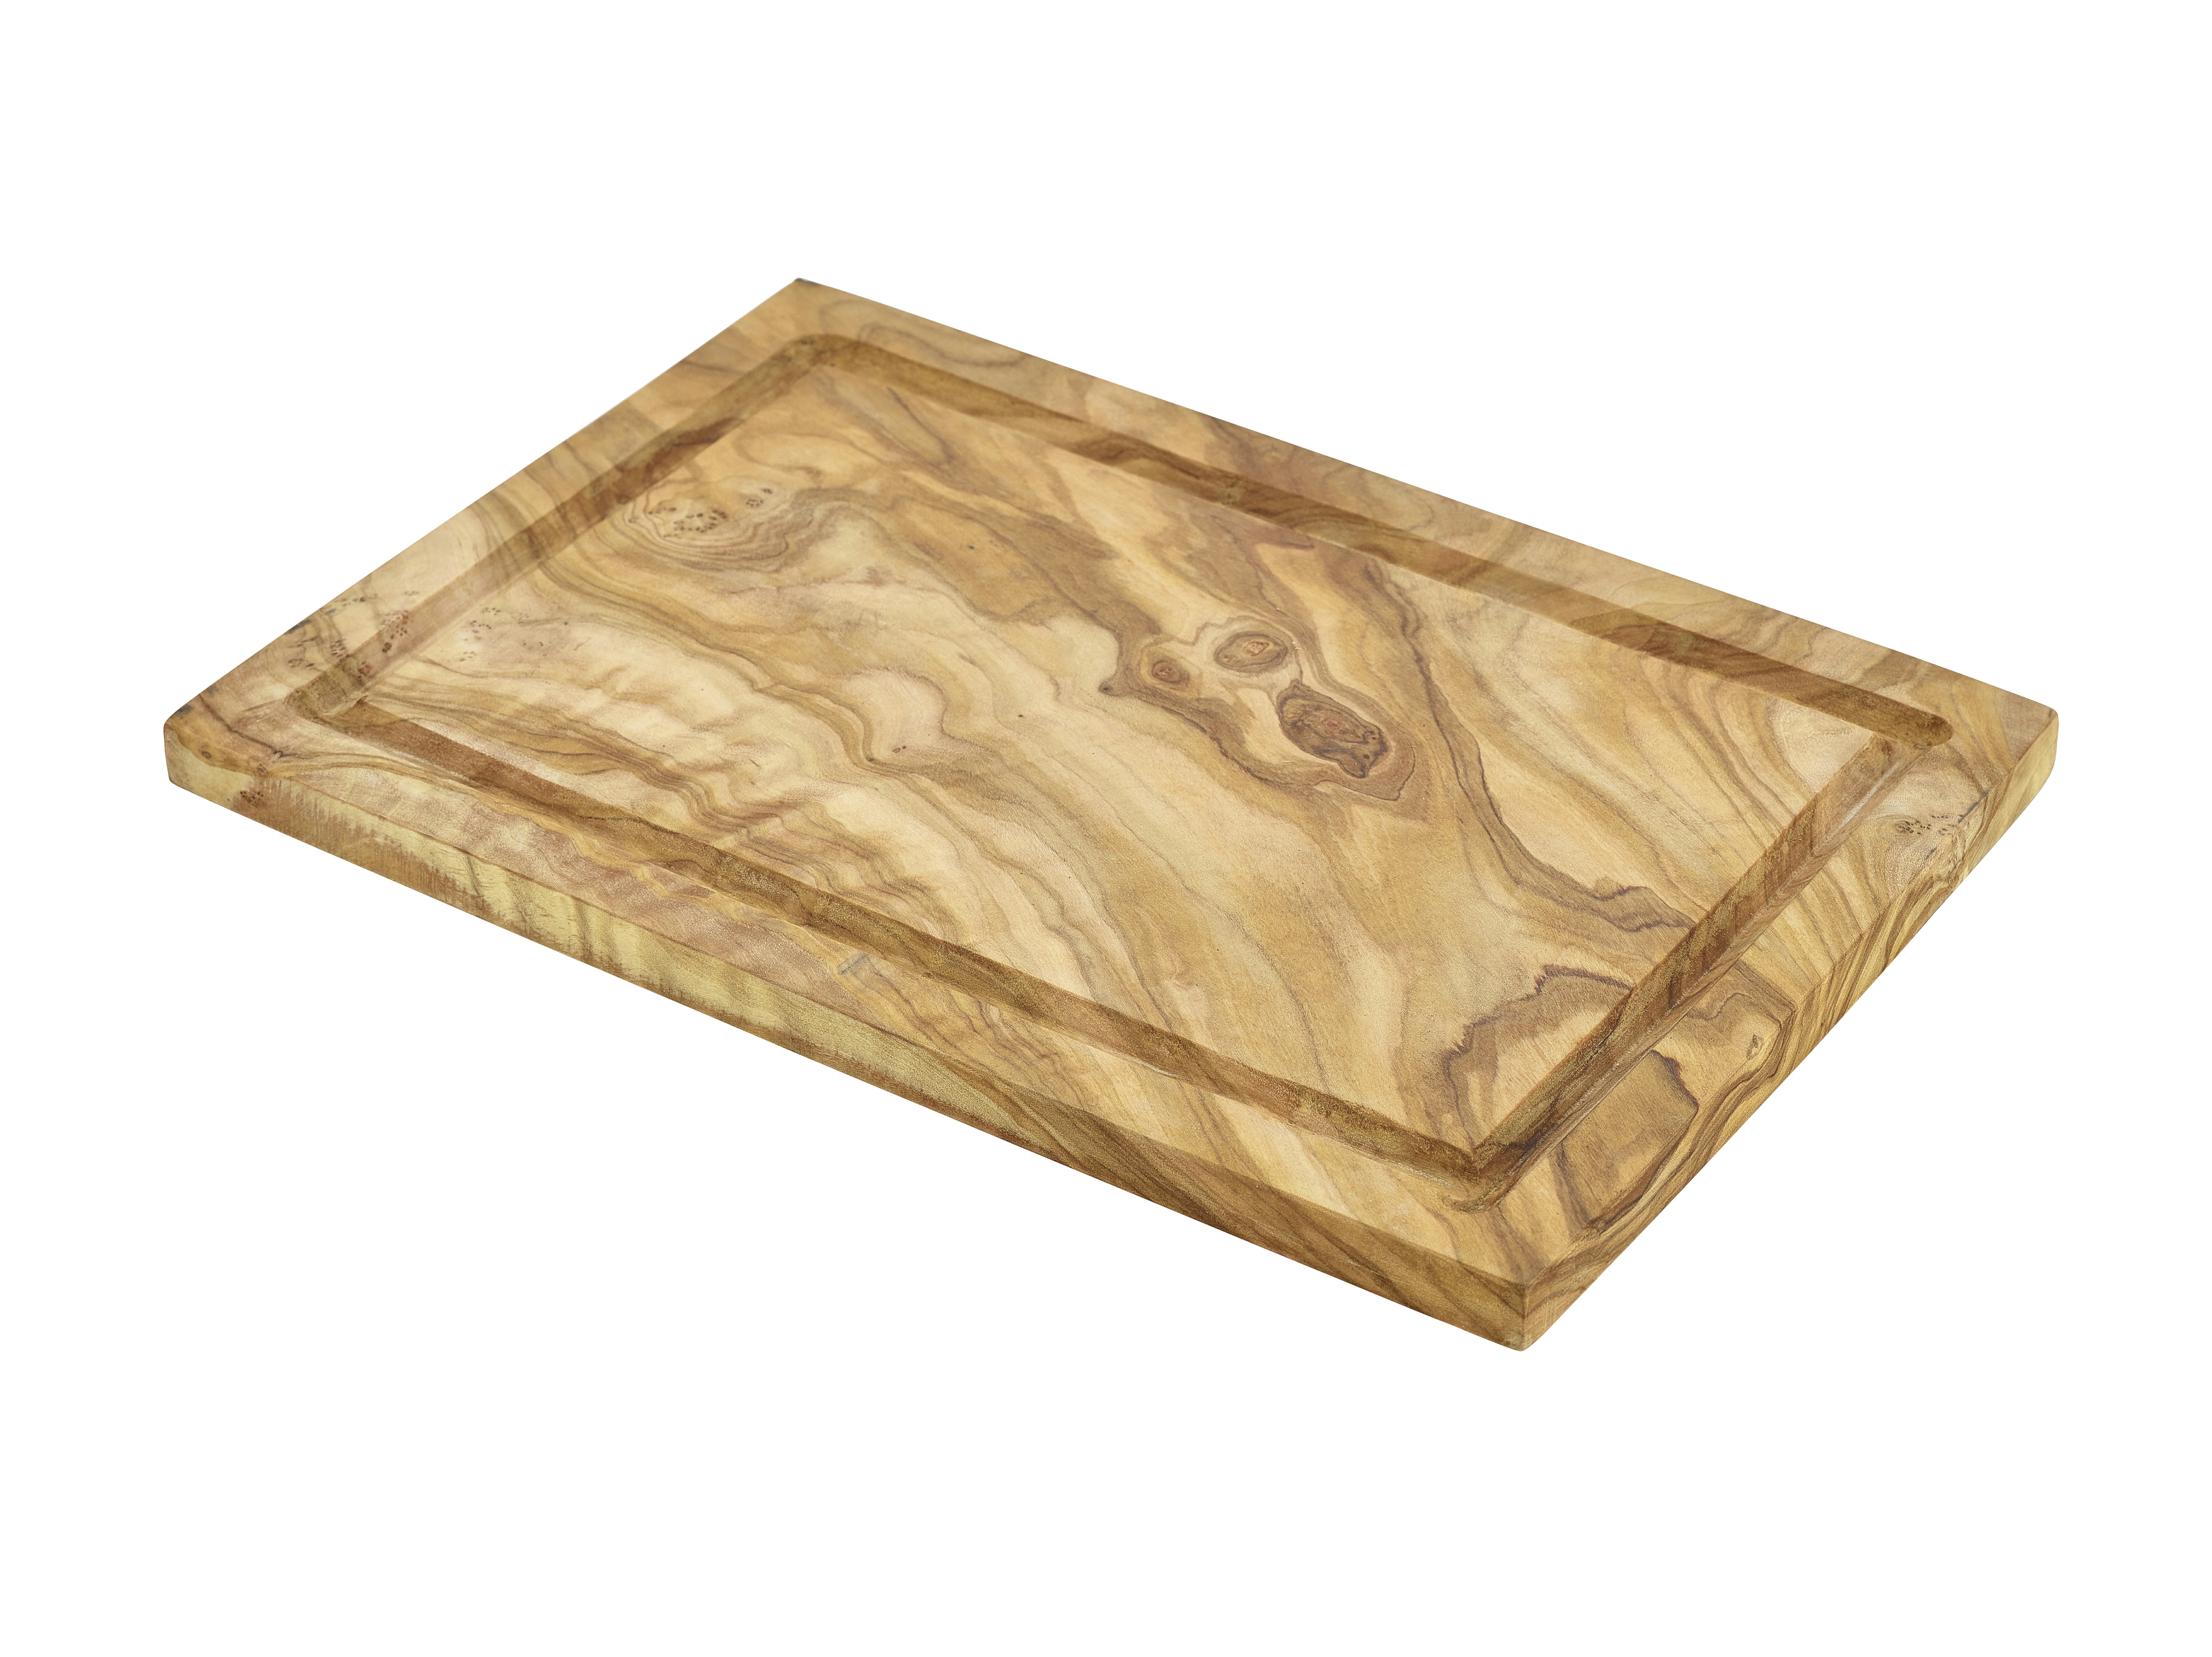 Olive Wood Serving Board W/ Groove 30 x 20cm+/-